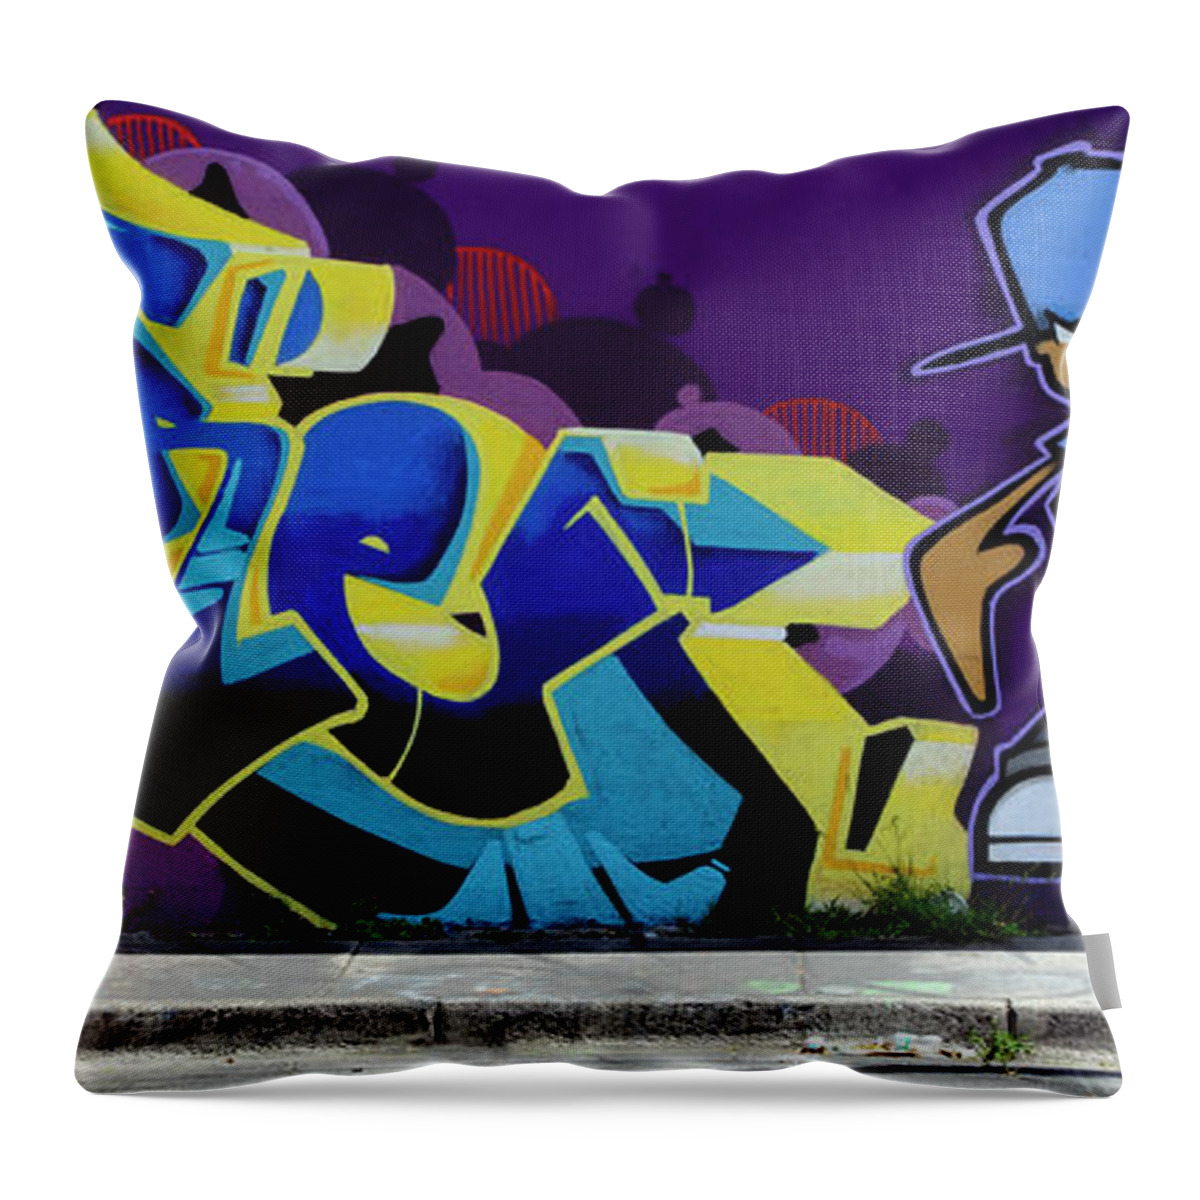 Graffiti Throw Pillow featuring the photograph Vibrant Dude by Keith Armstrong